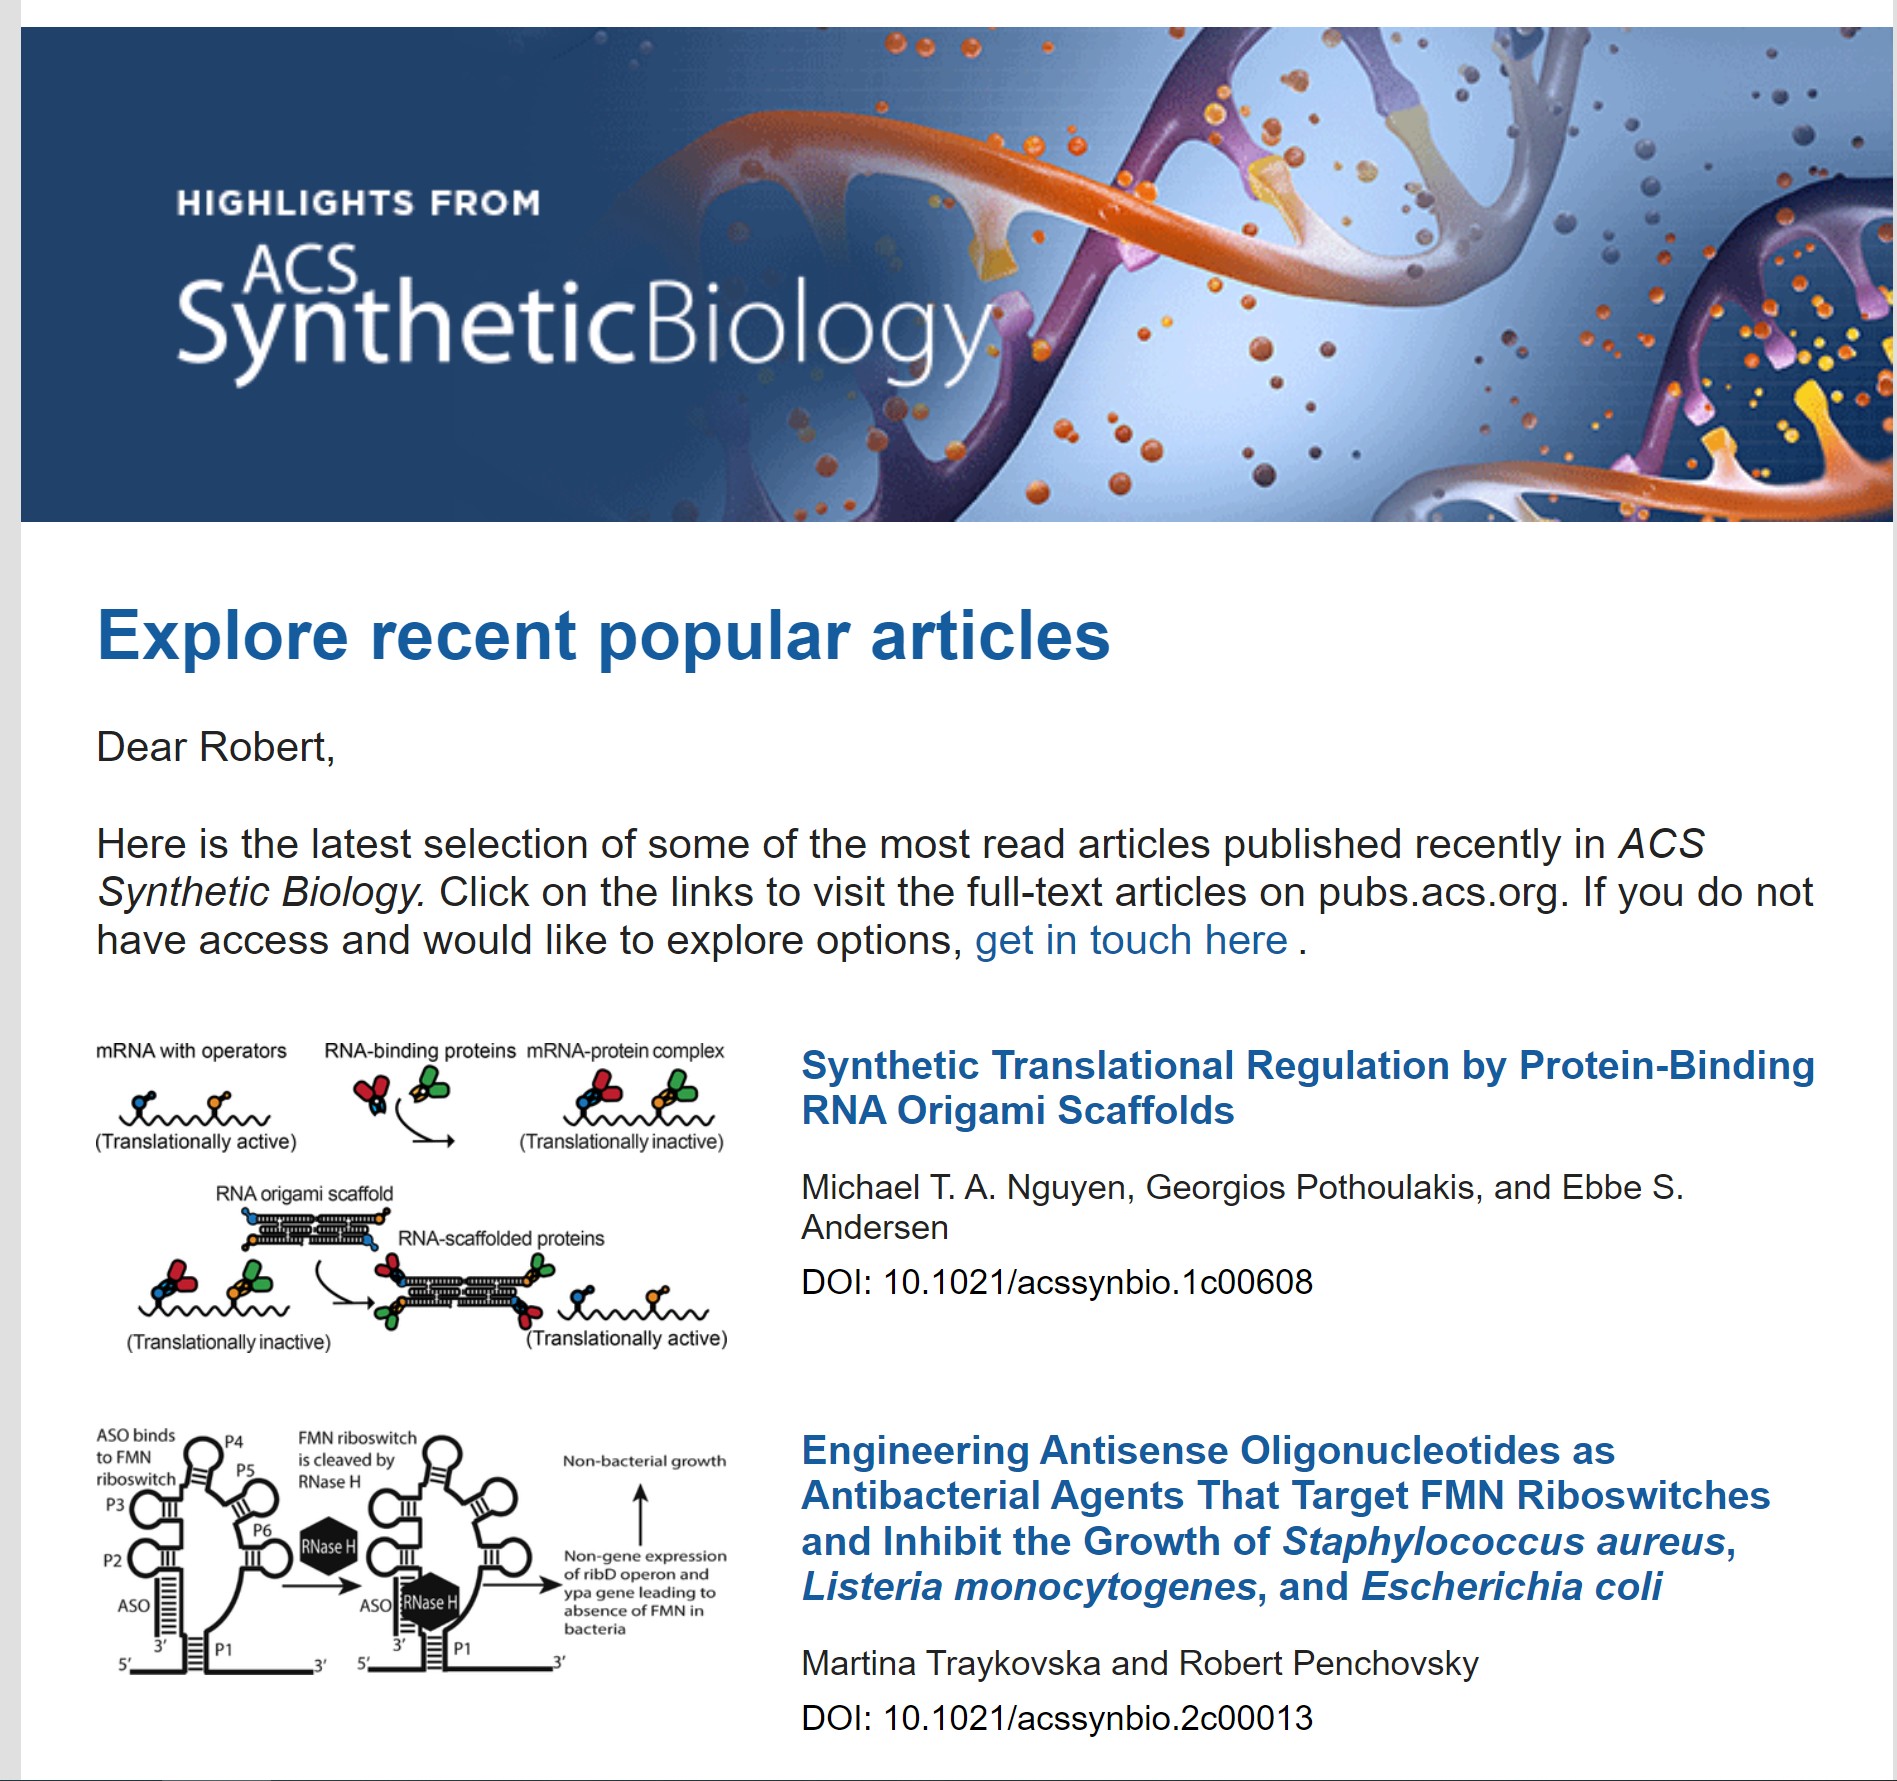 Our recent paper is among the most popular in the ACS Synthetic Biology!